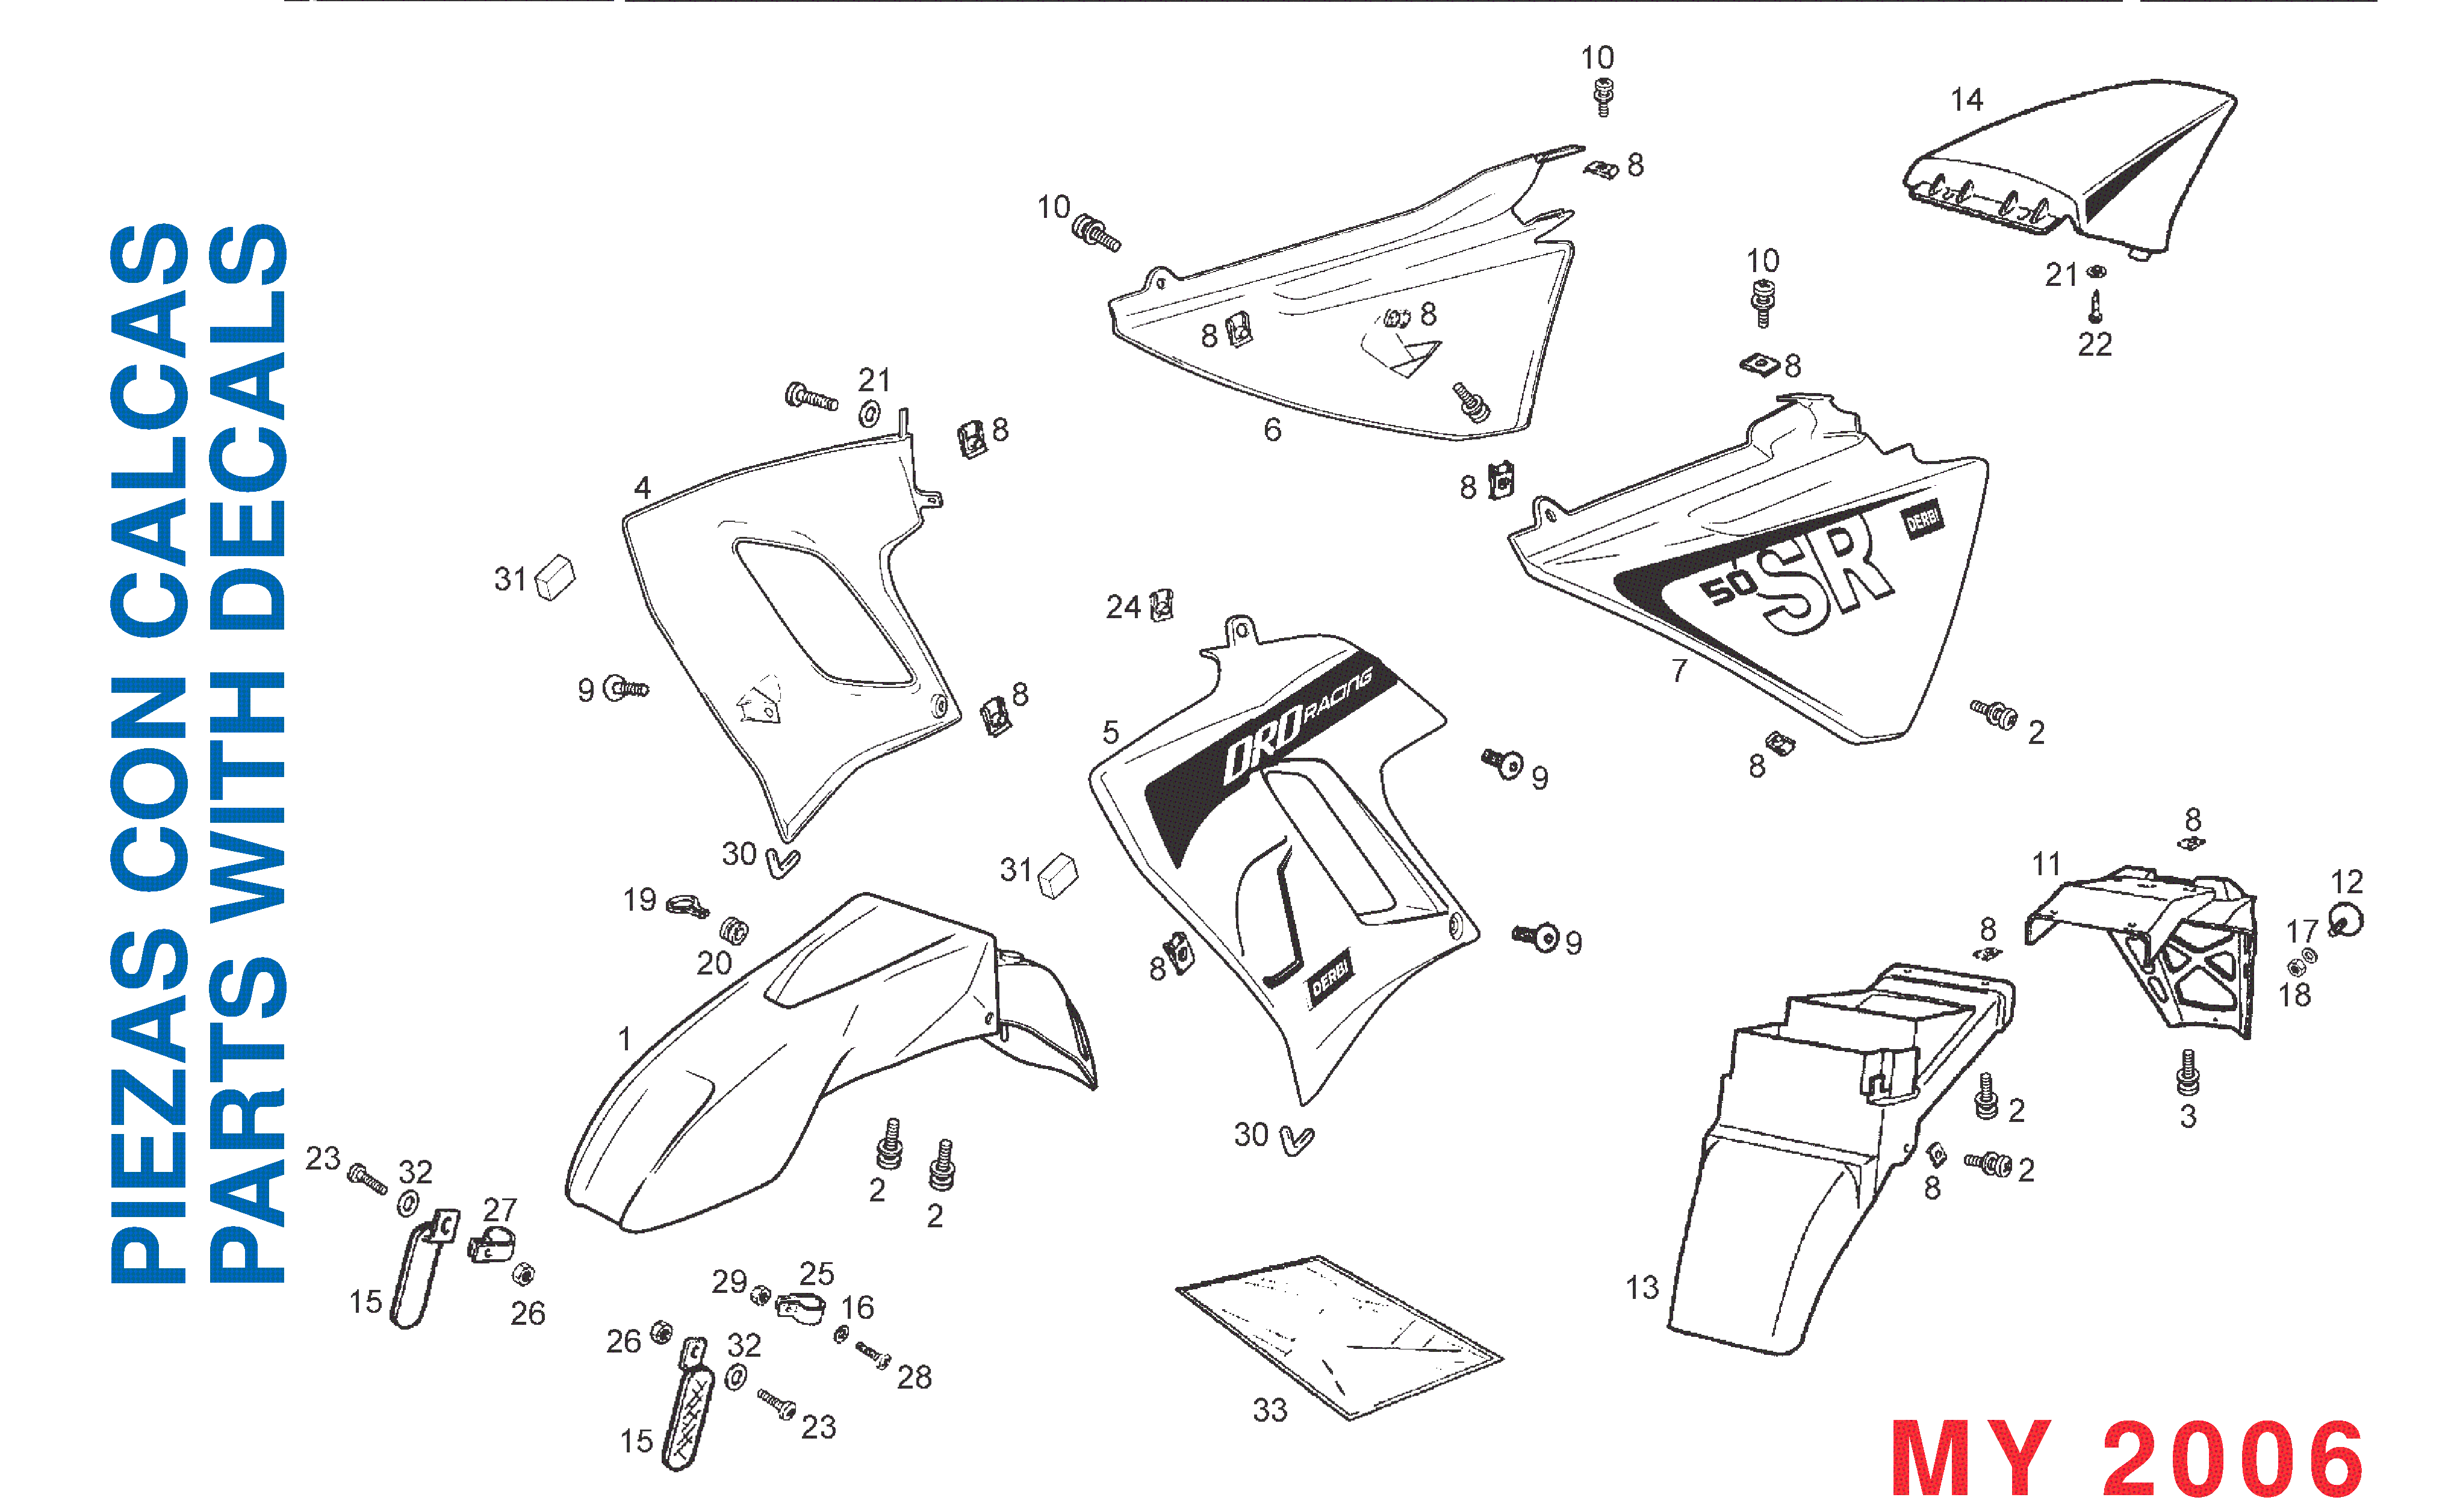 CHASSIS COMPONENTS (2006)